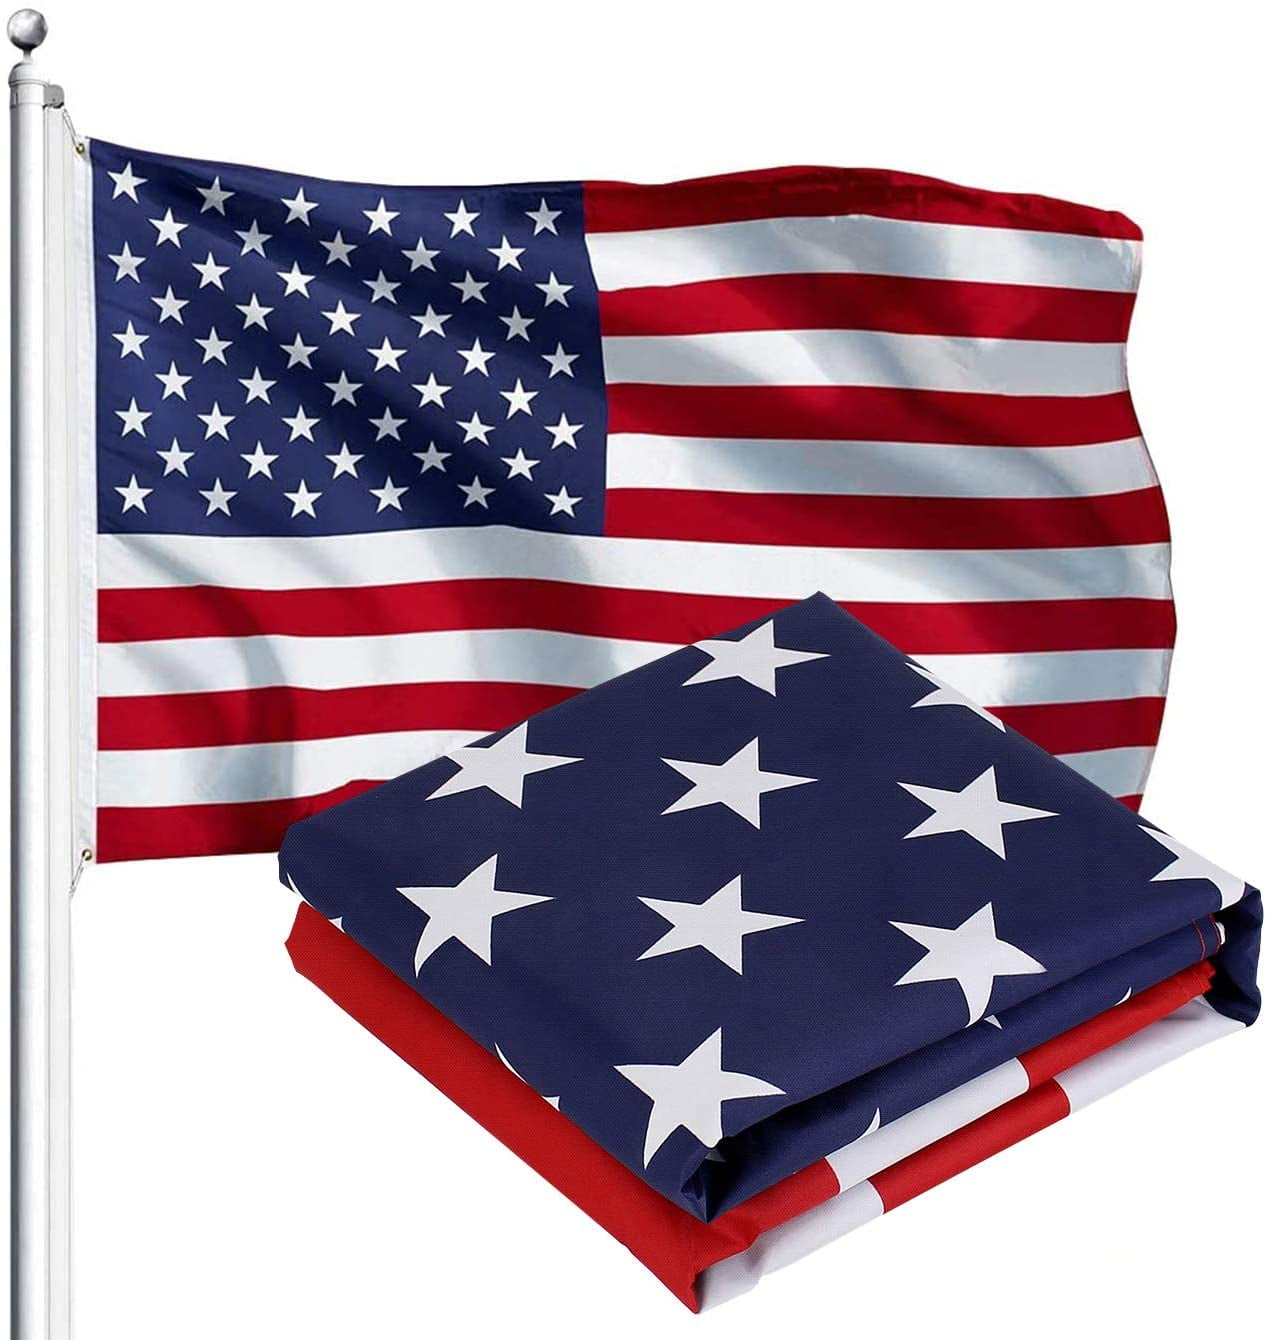 NEW Patriotic American Flag 3x5 ft Outdoor Heavy Duty Nylon US Flag Made in USA 